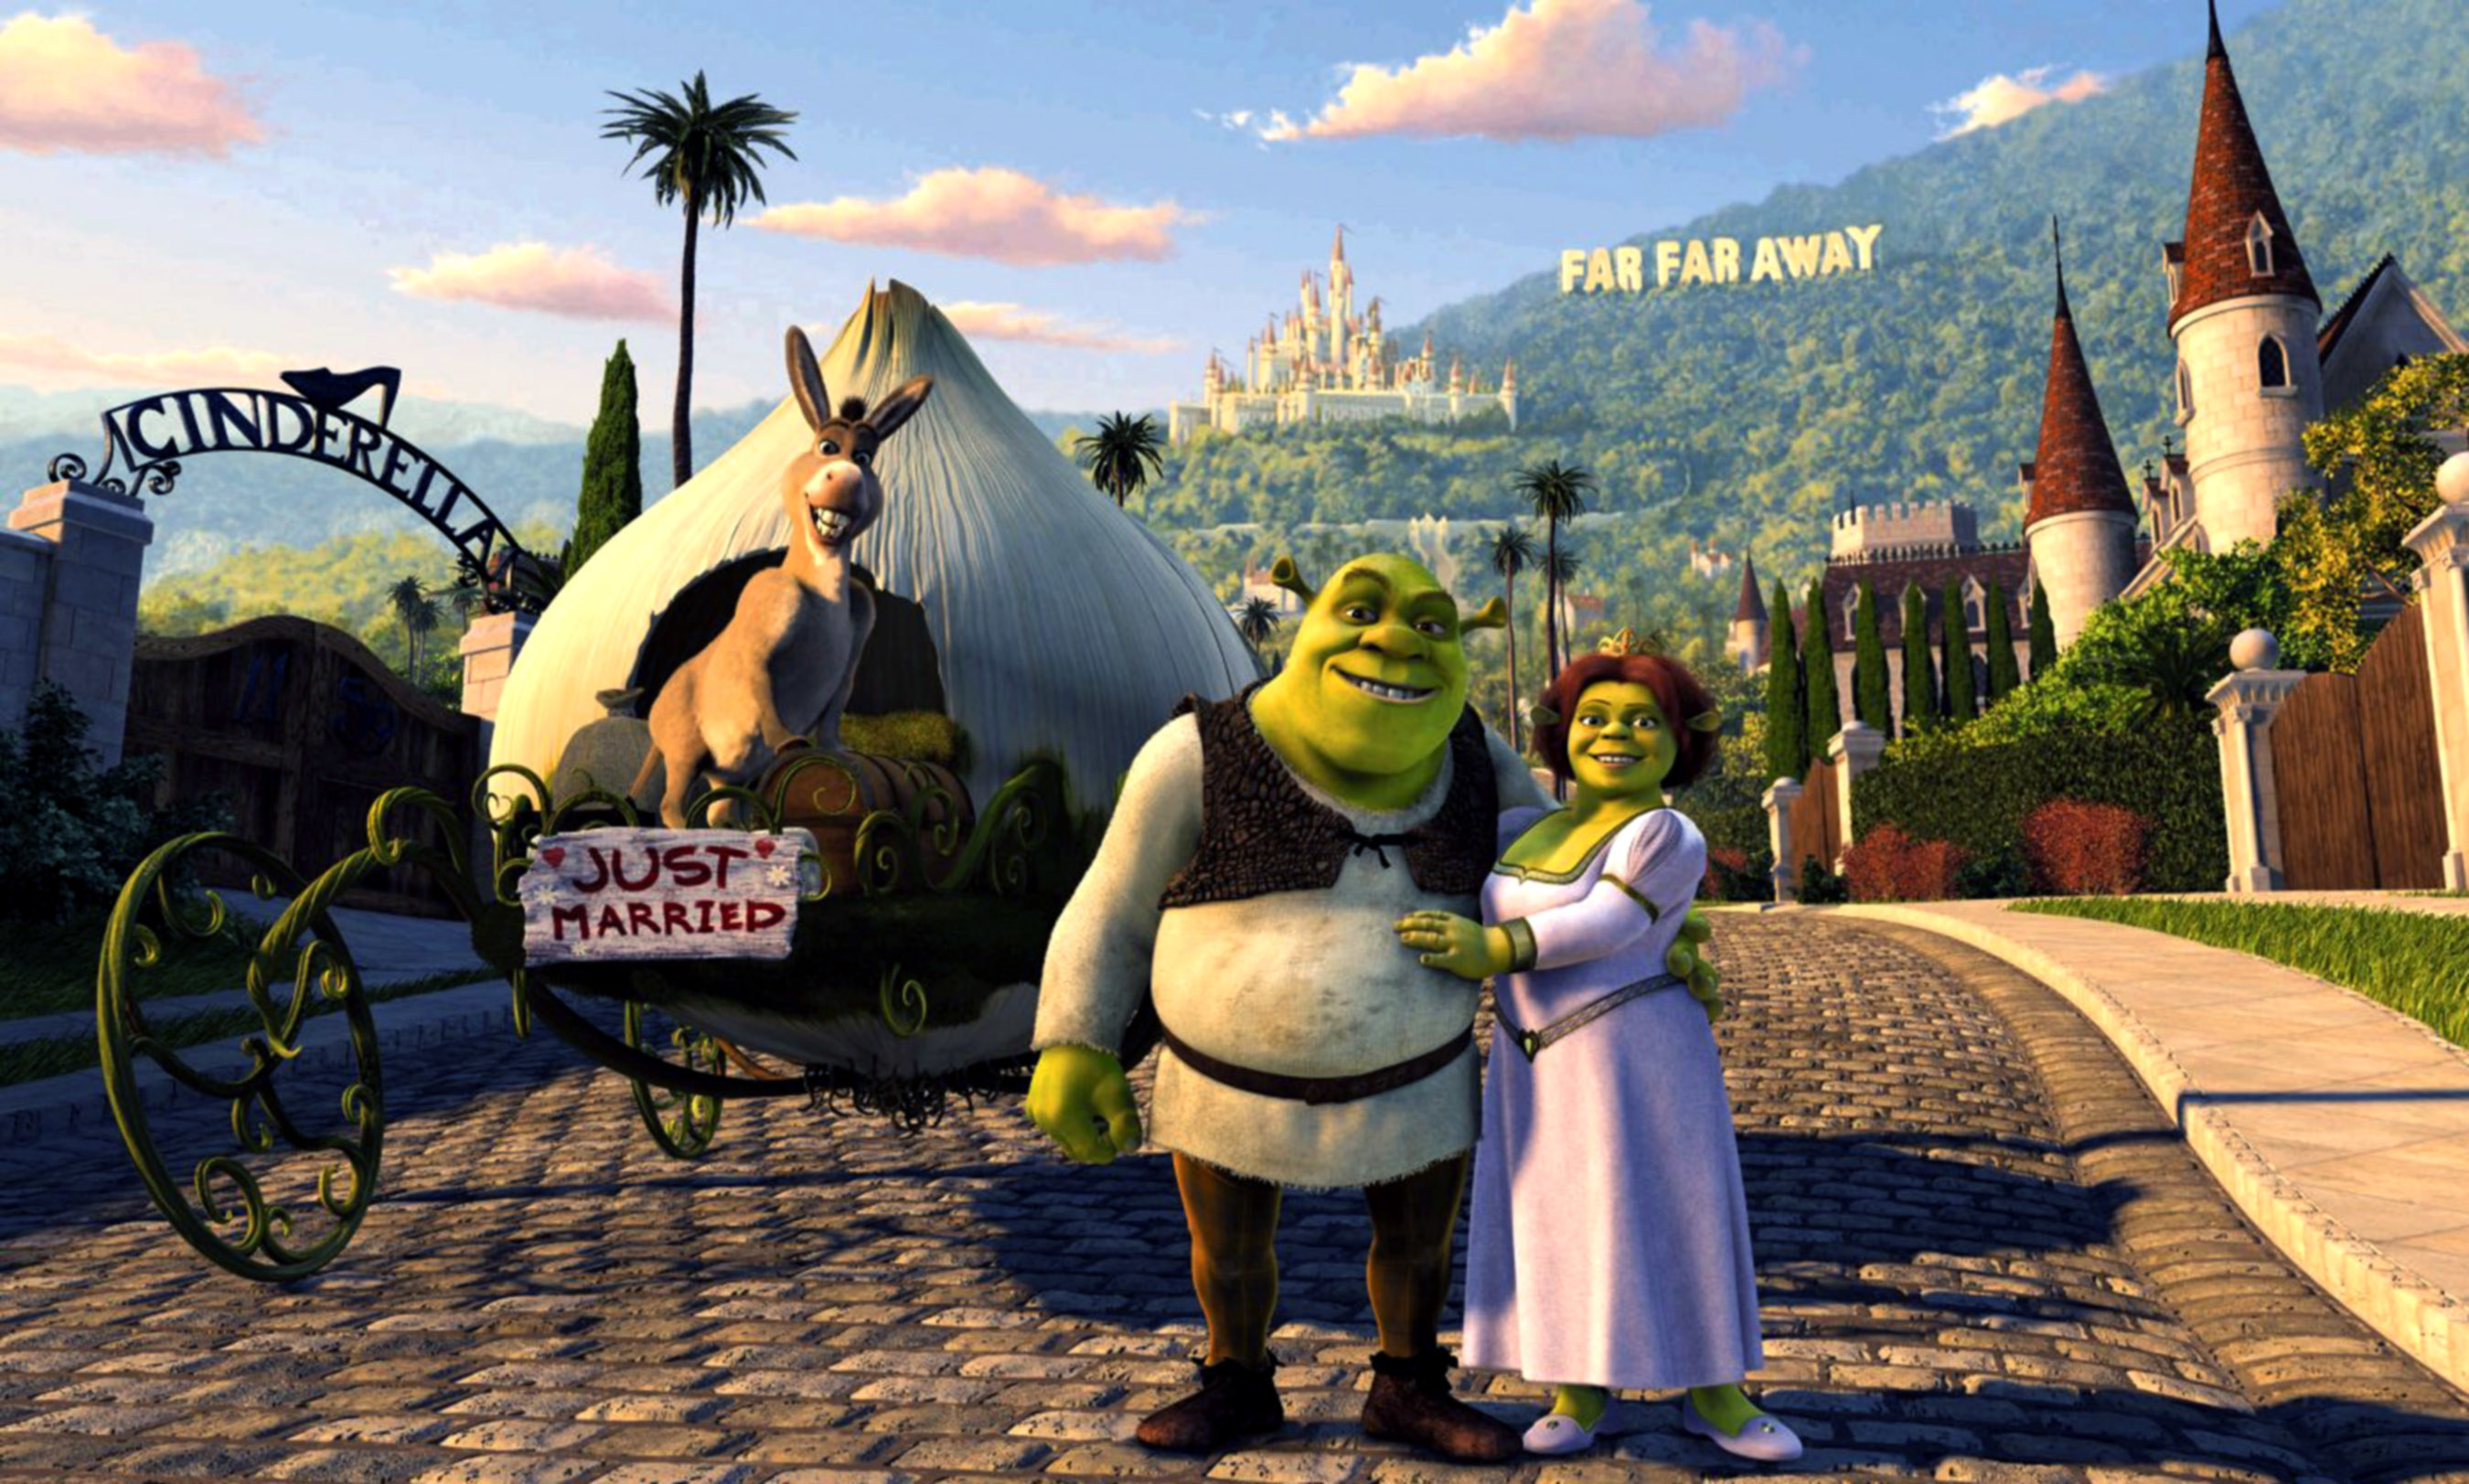 Shrek and Fiona after getting married with Donkey standing on the onion carriage